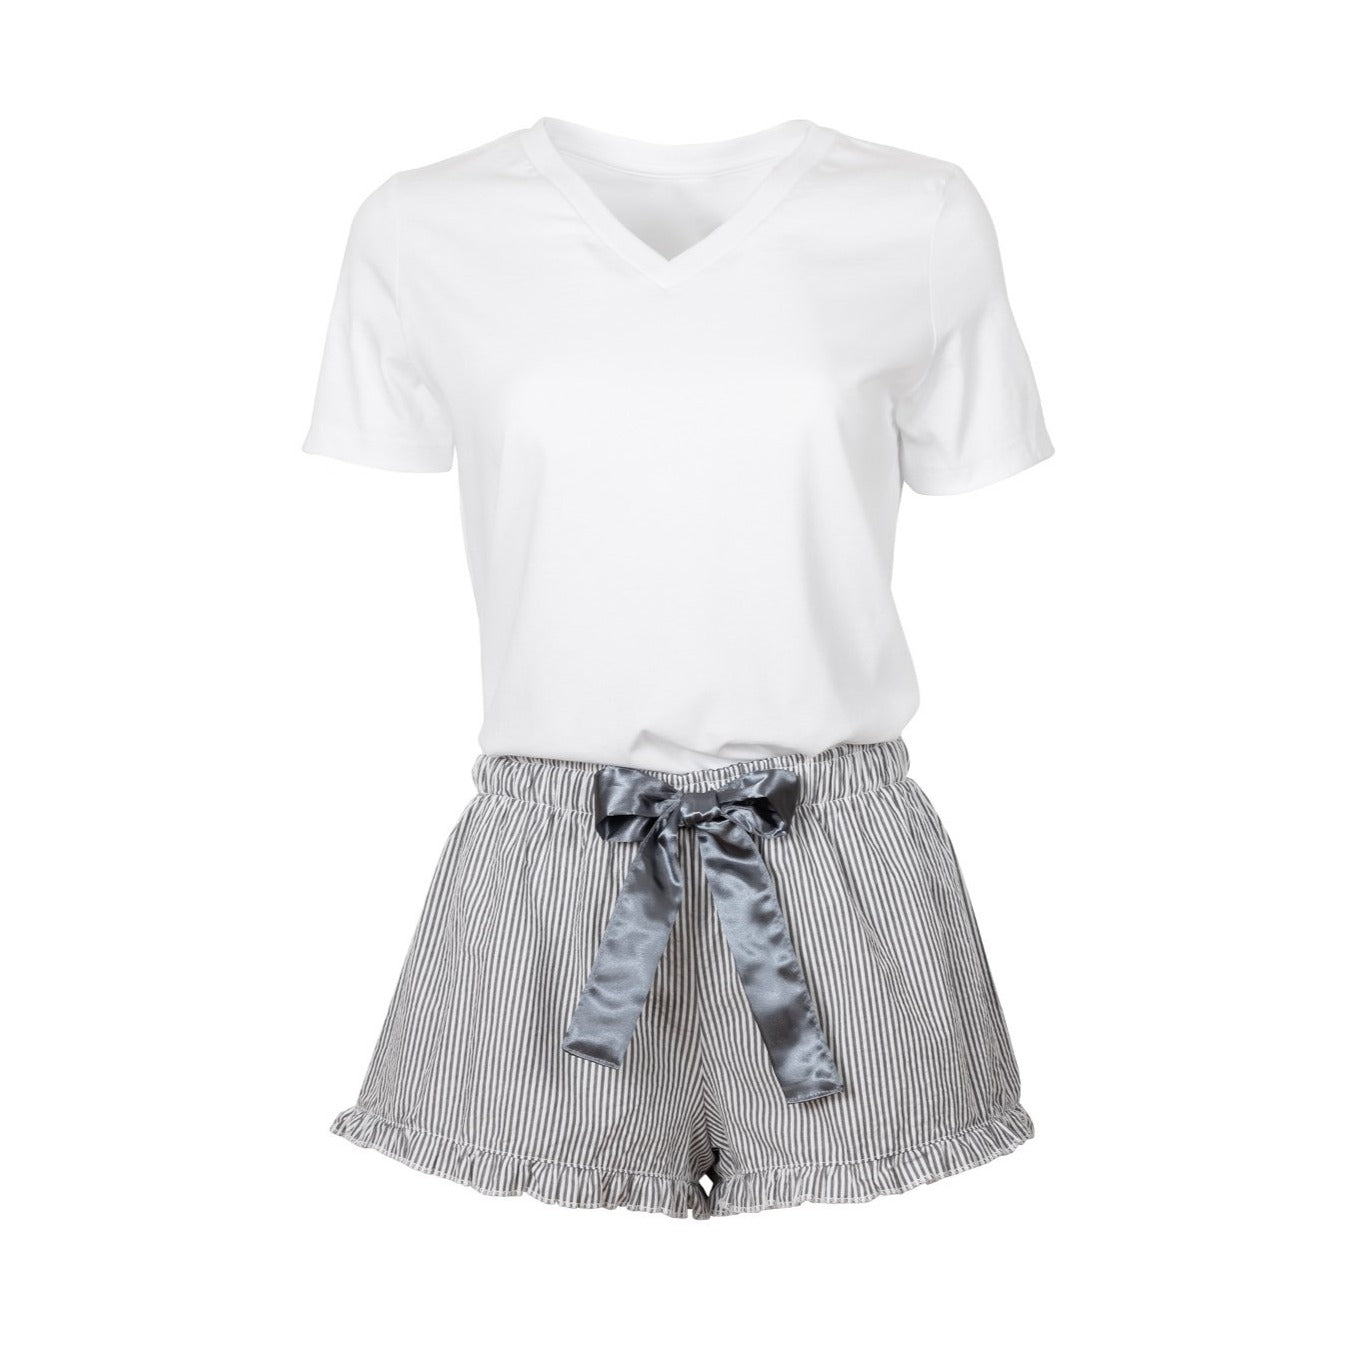 White V necked teeshirt with charcoal grey striped shorts with a gray satin bow.